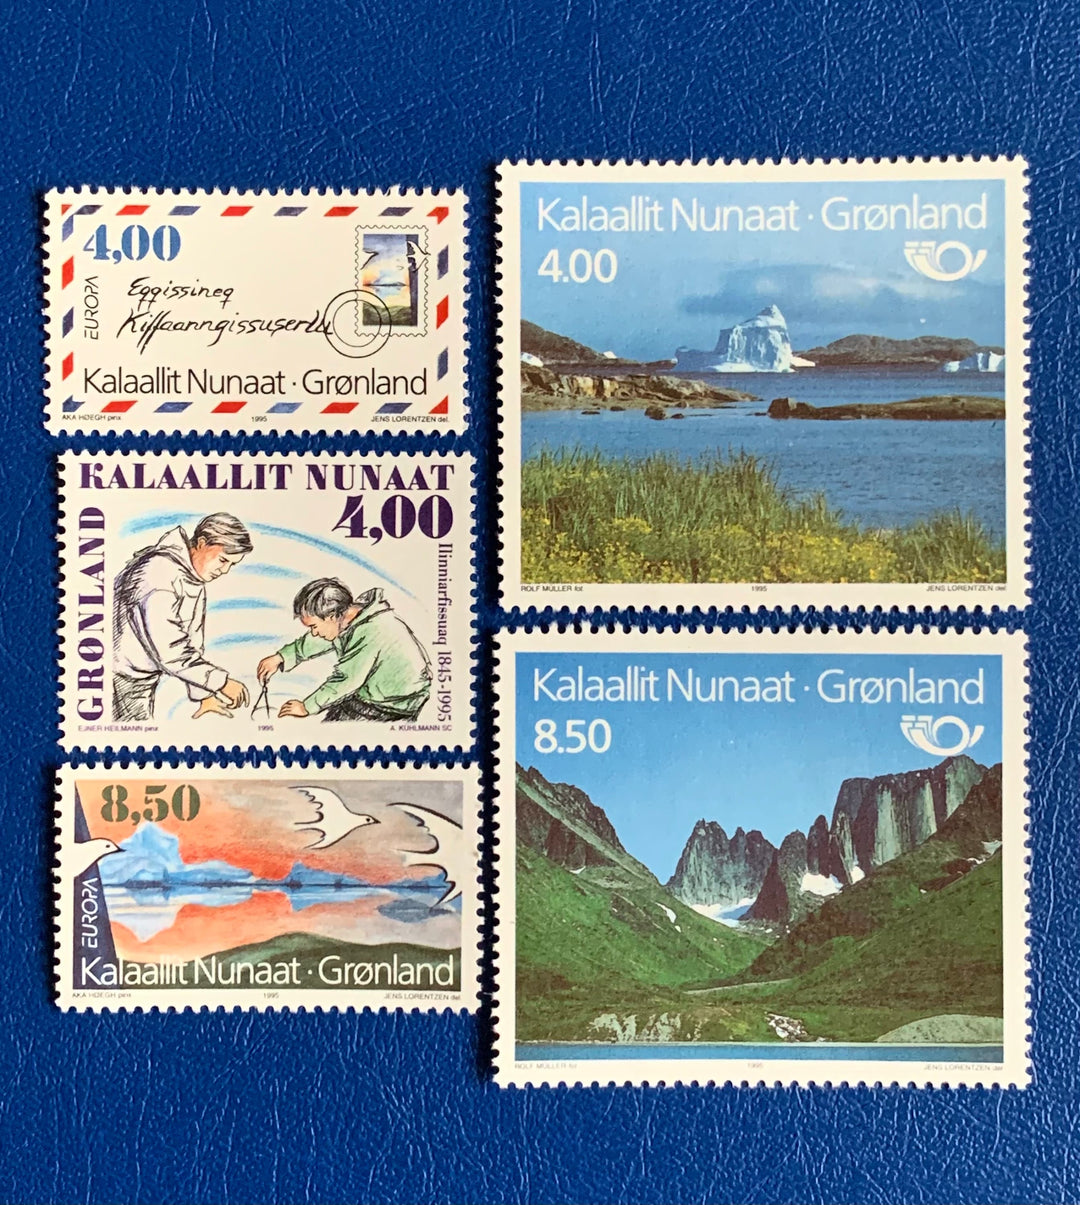 Greenland - Original Vintage Postage Stamps- 1995 - Scenery, Peace & Freedom, Teachers - for the collector, artist or crafter